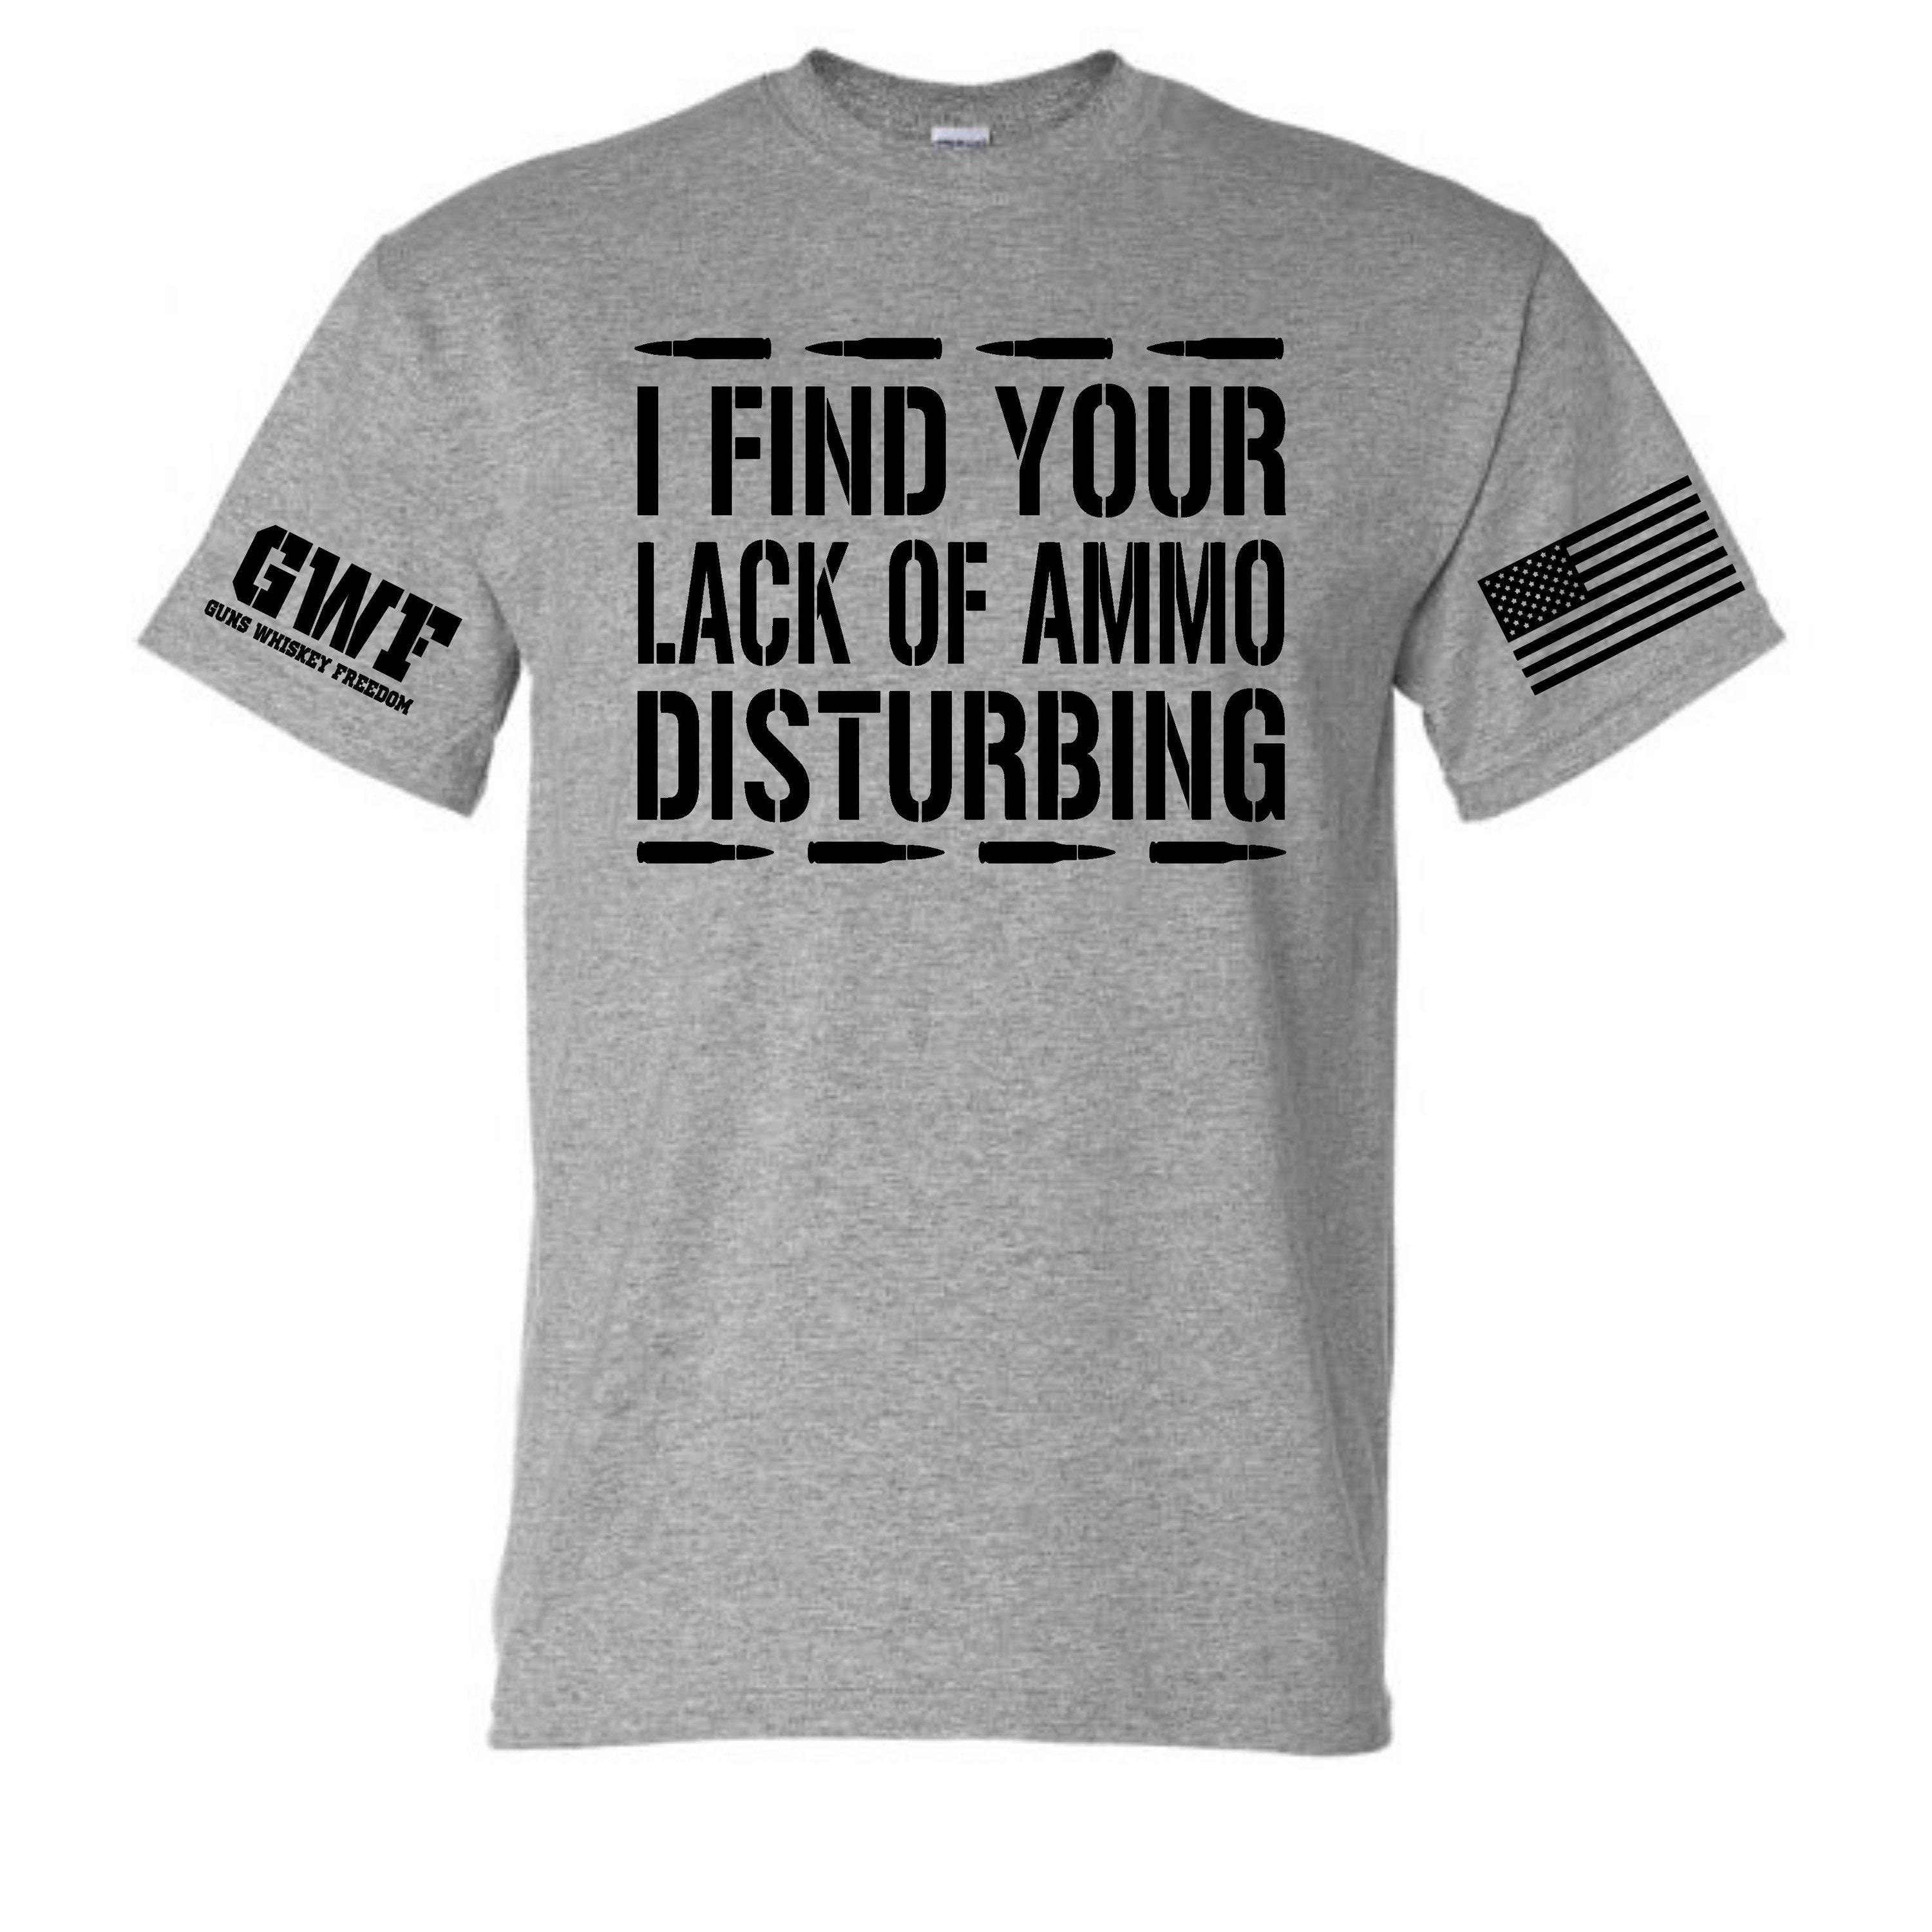 I Find Your Lack Of Ammo Disturbing 2A Graphic T-shirt | Etsy